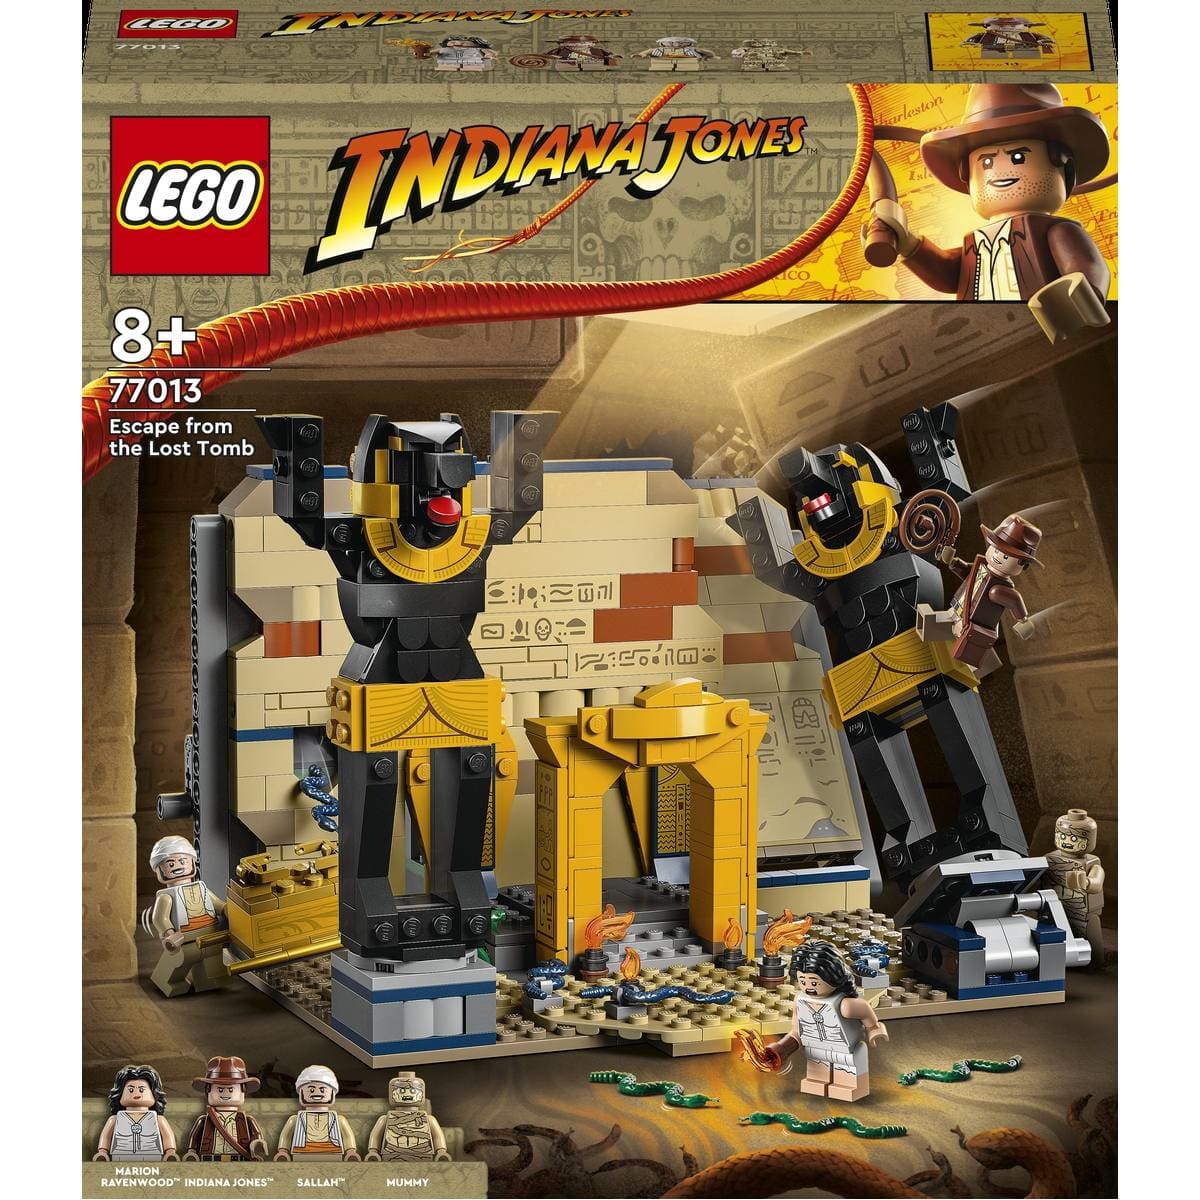 Kmart  LEGO Indiana Jones Escape from the Lost Tomb 77013